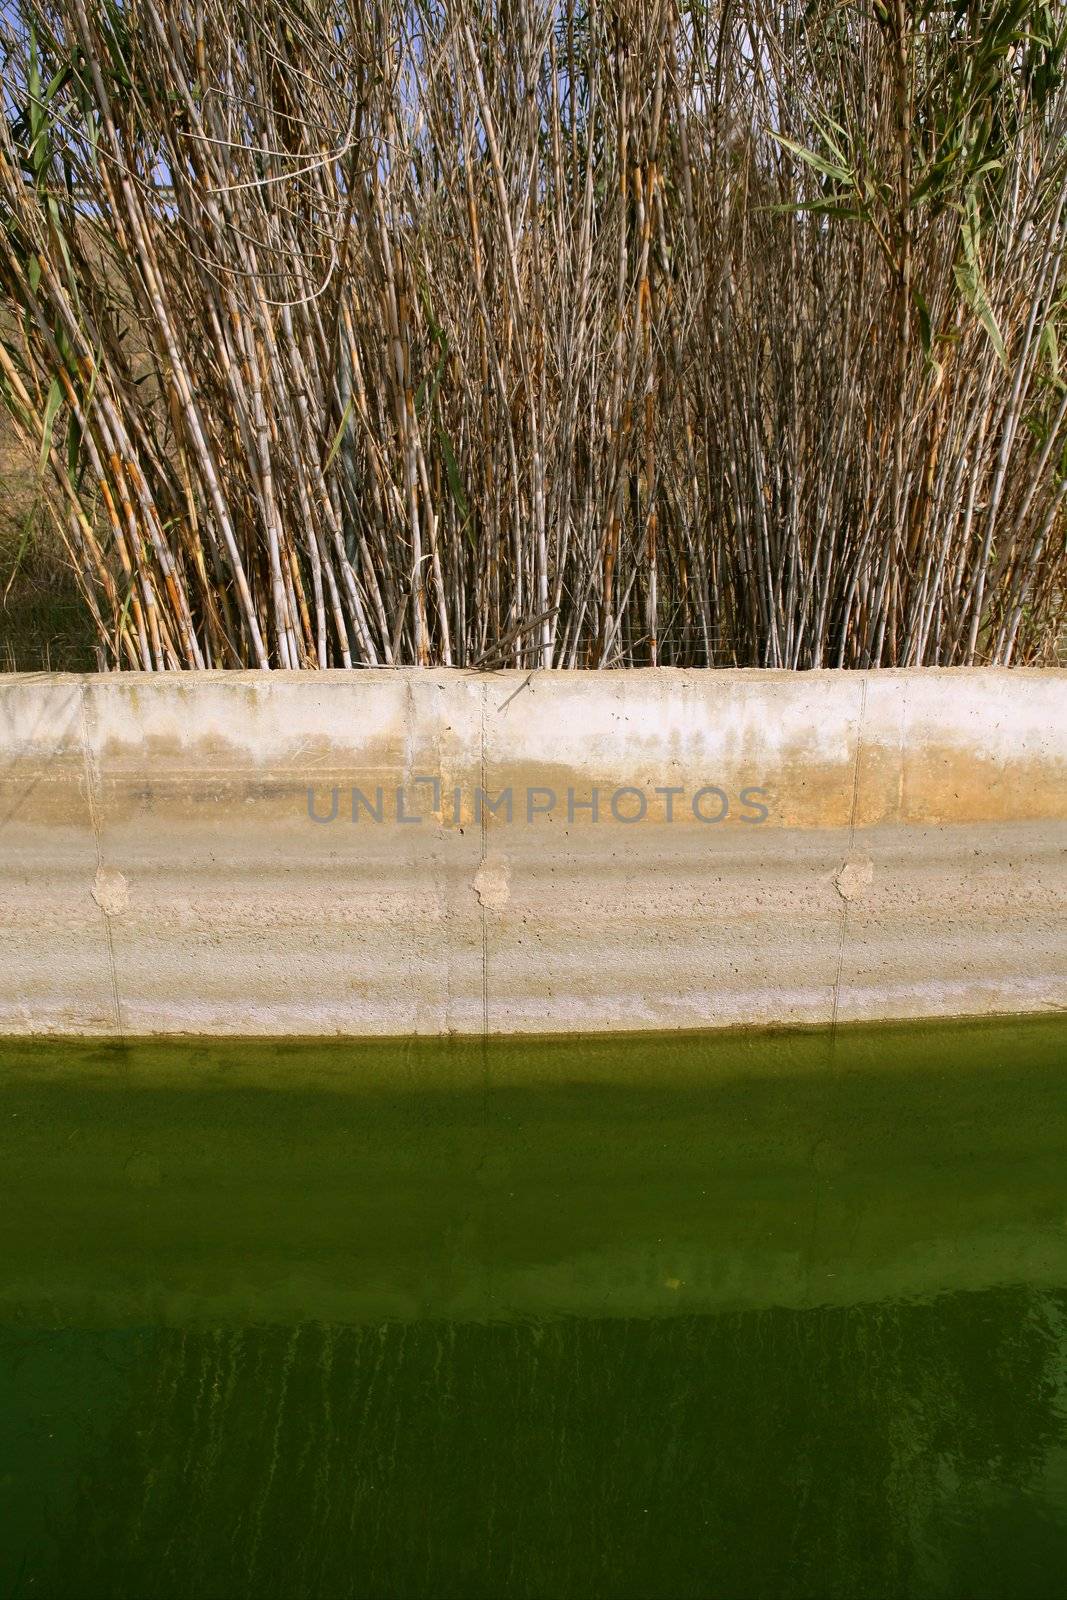 Irrigation ditch canal for agridulture use in Spain